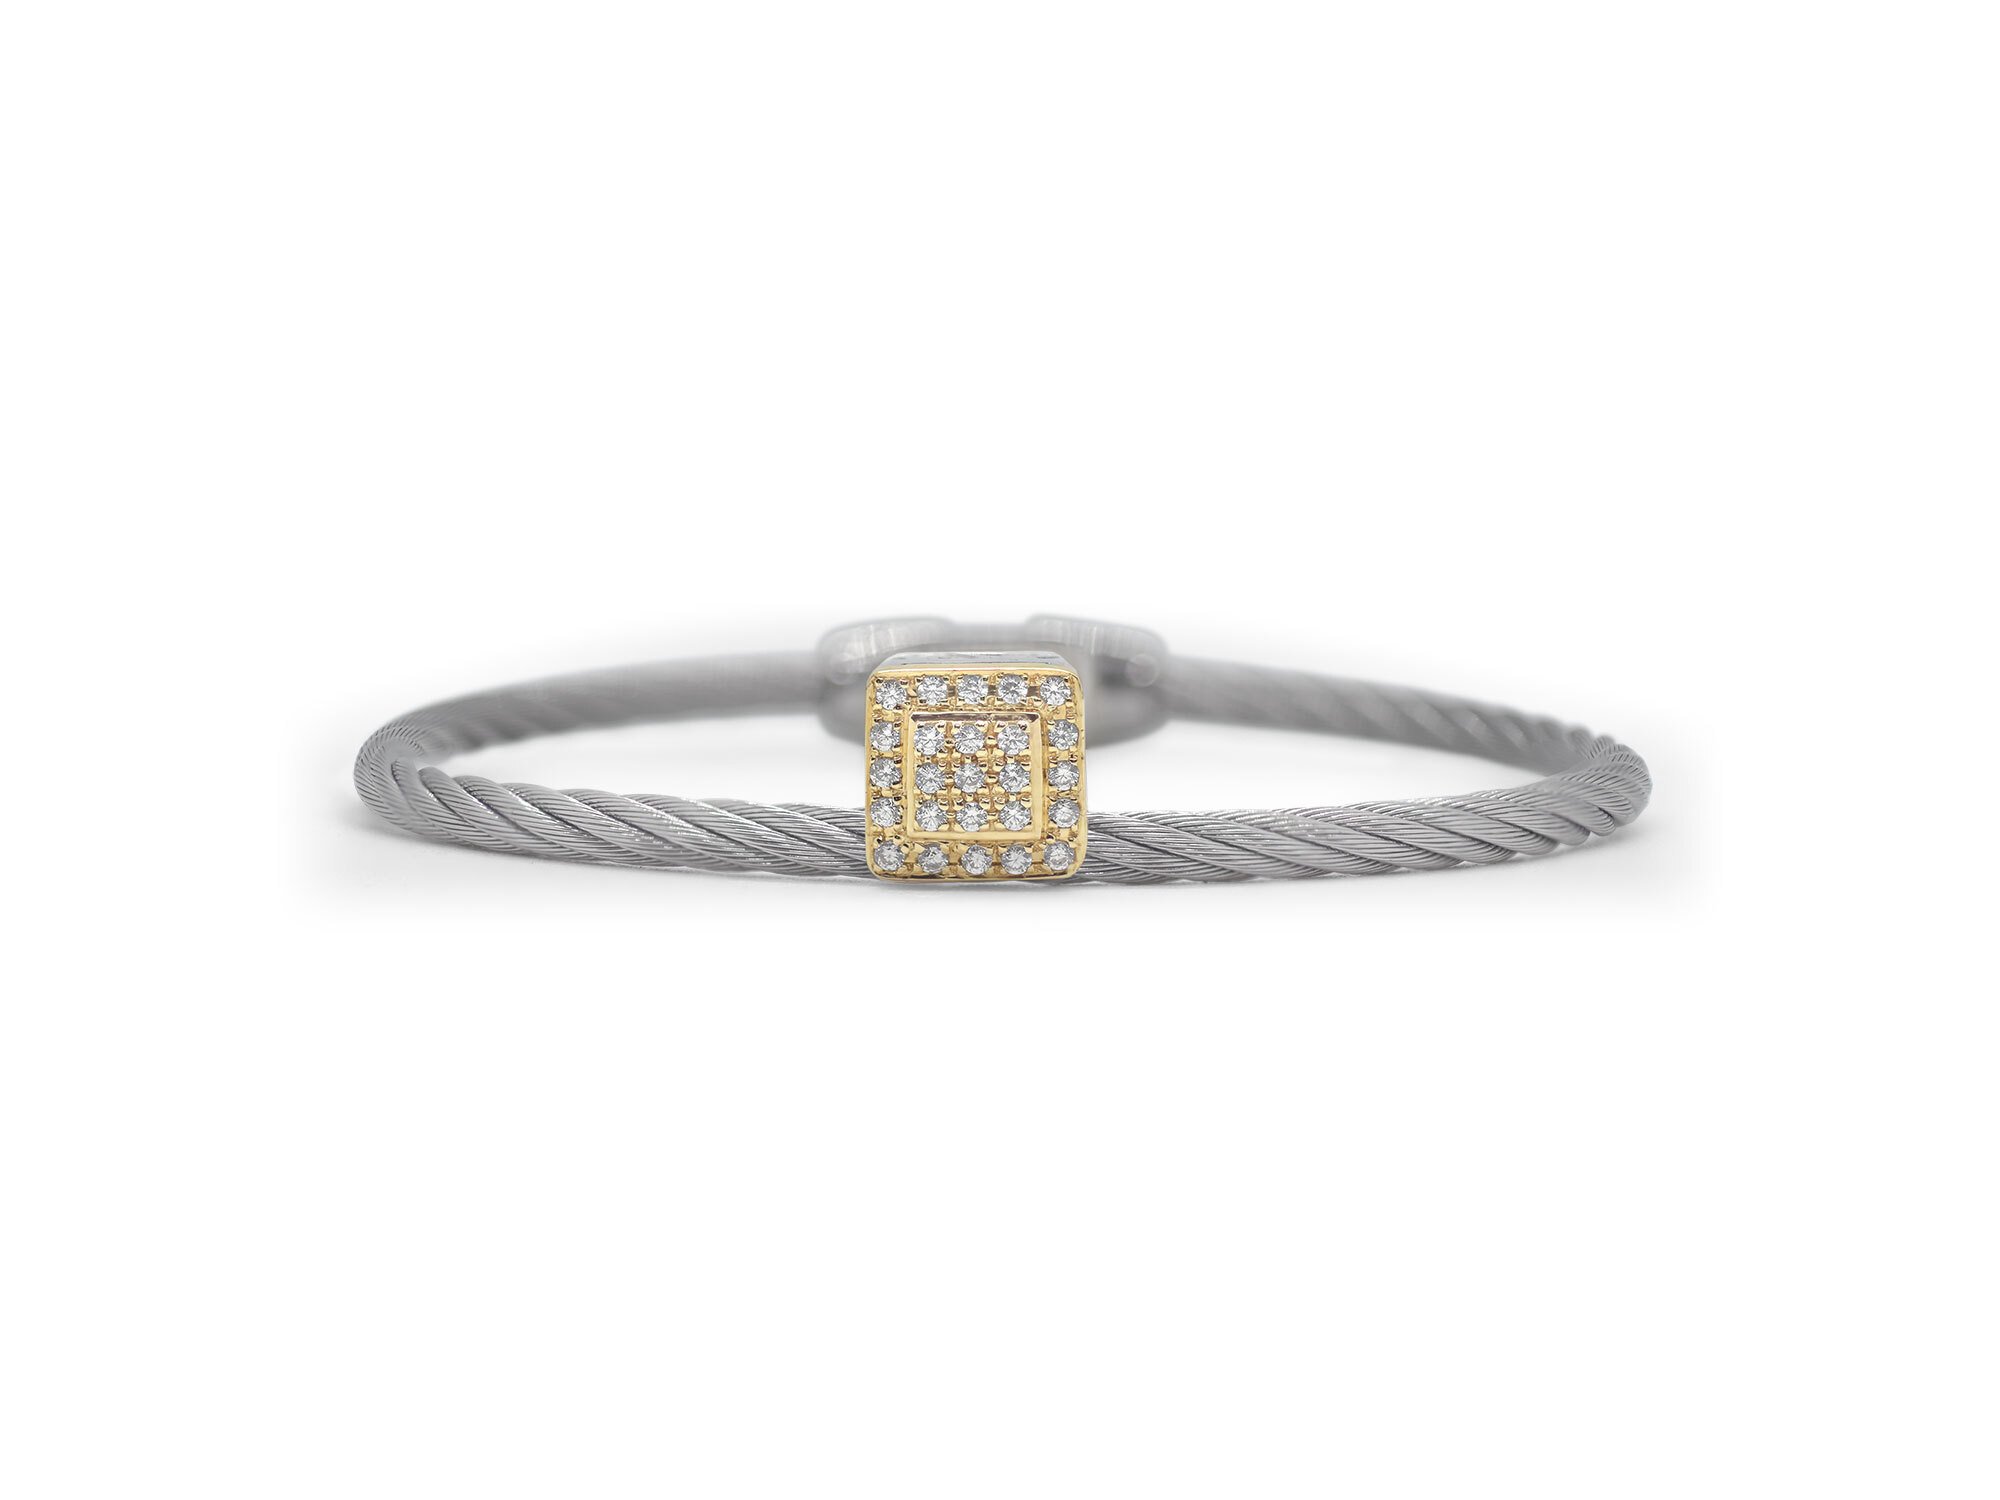 ALOR Grey Cable Elevated Square Station Bracelet with 18kt Yellow Gold & Diamonds